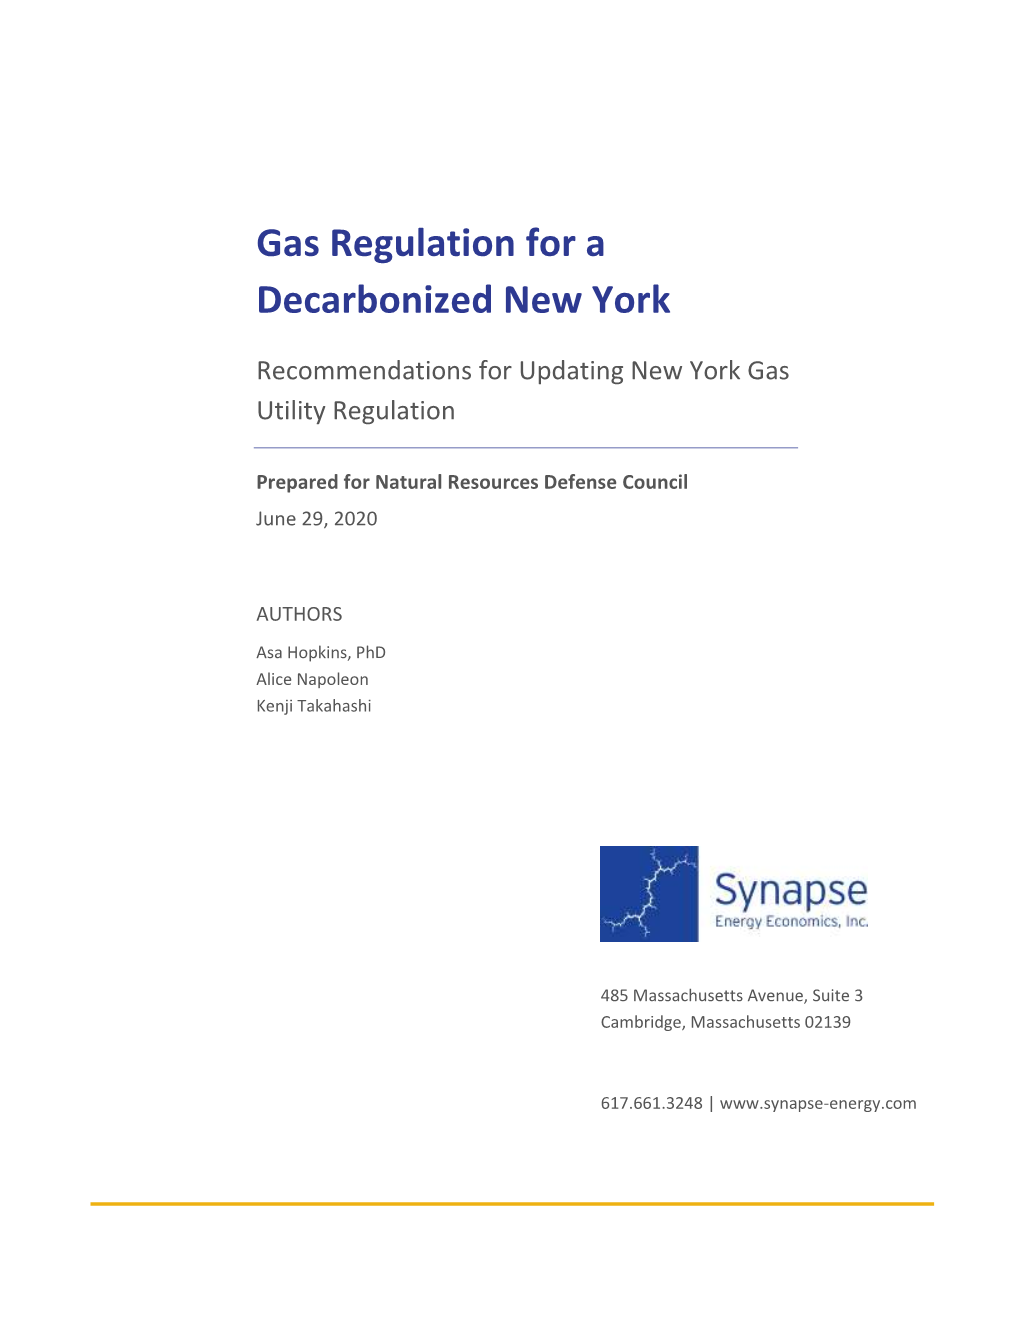 Gas Regulation for a Decarbonized New York